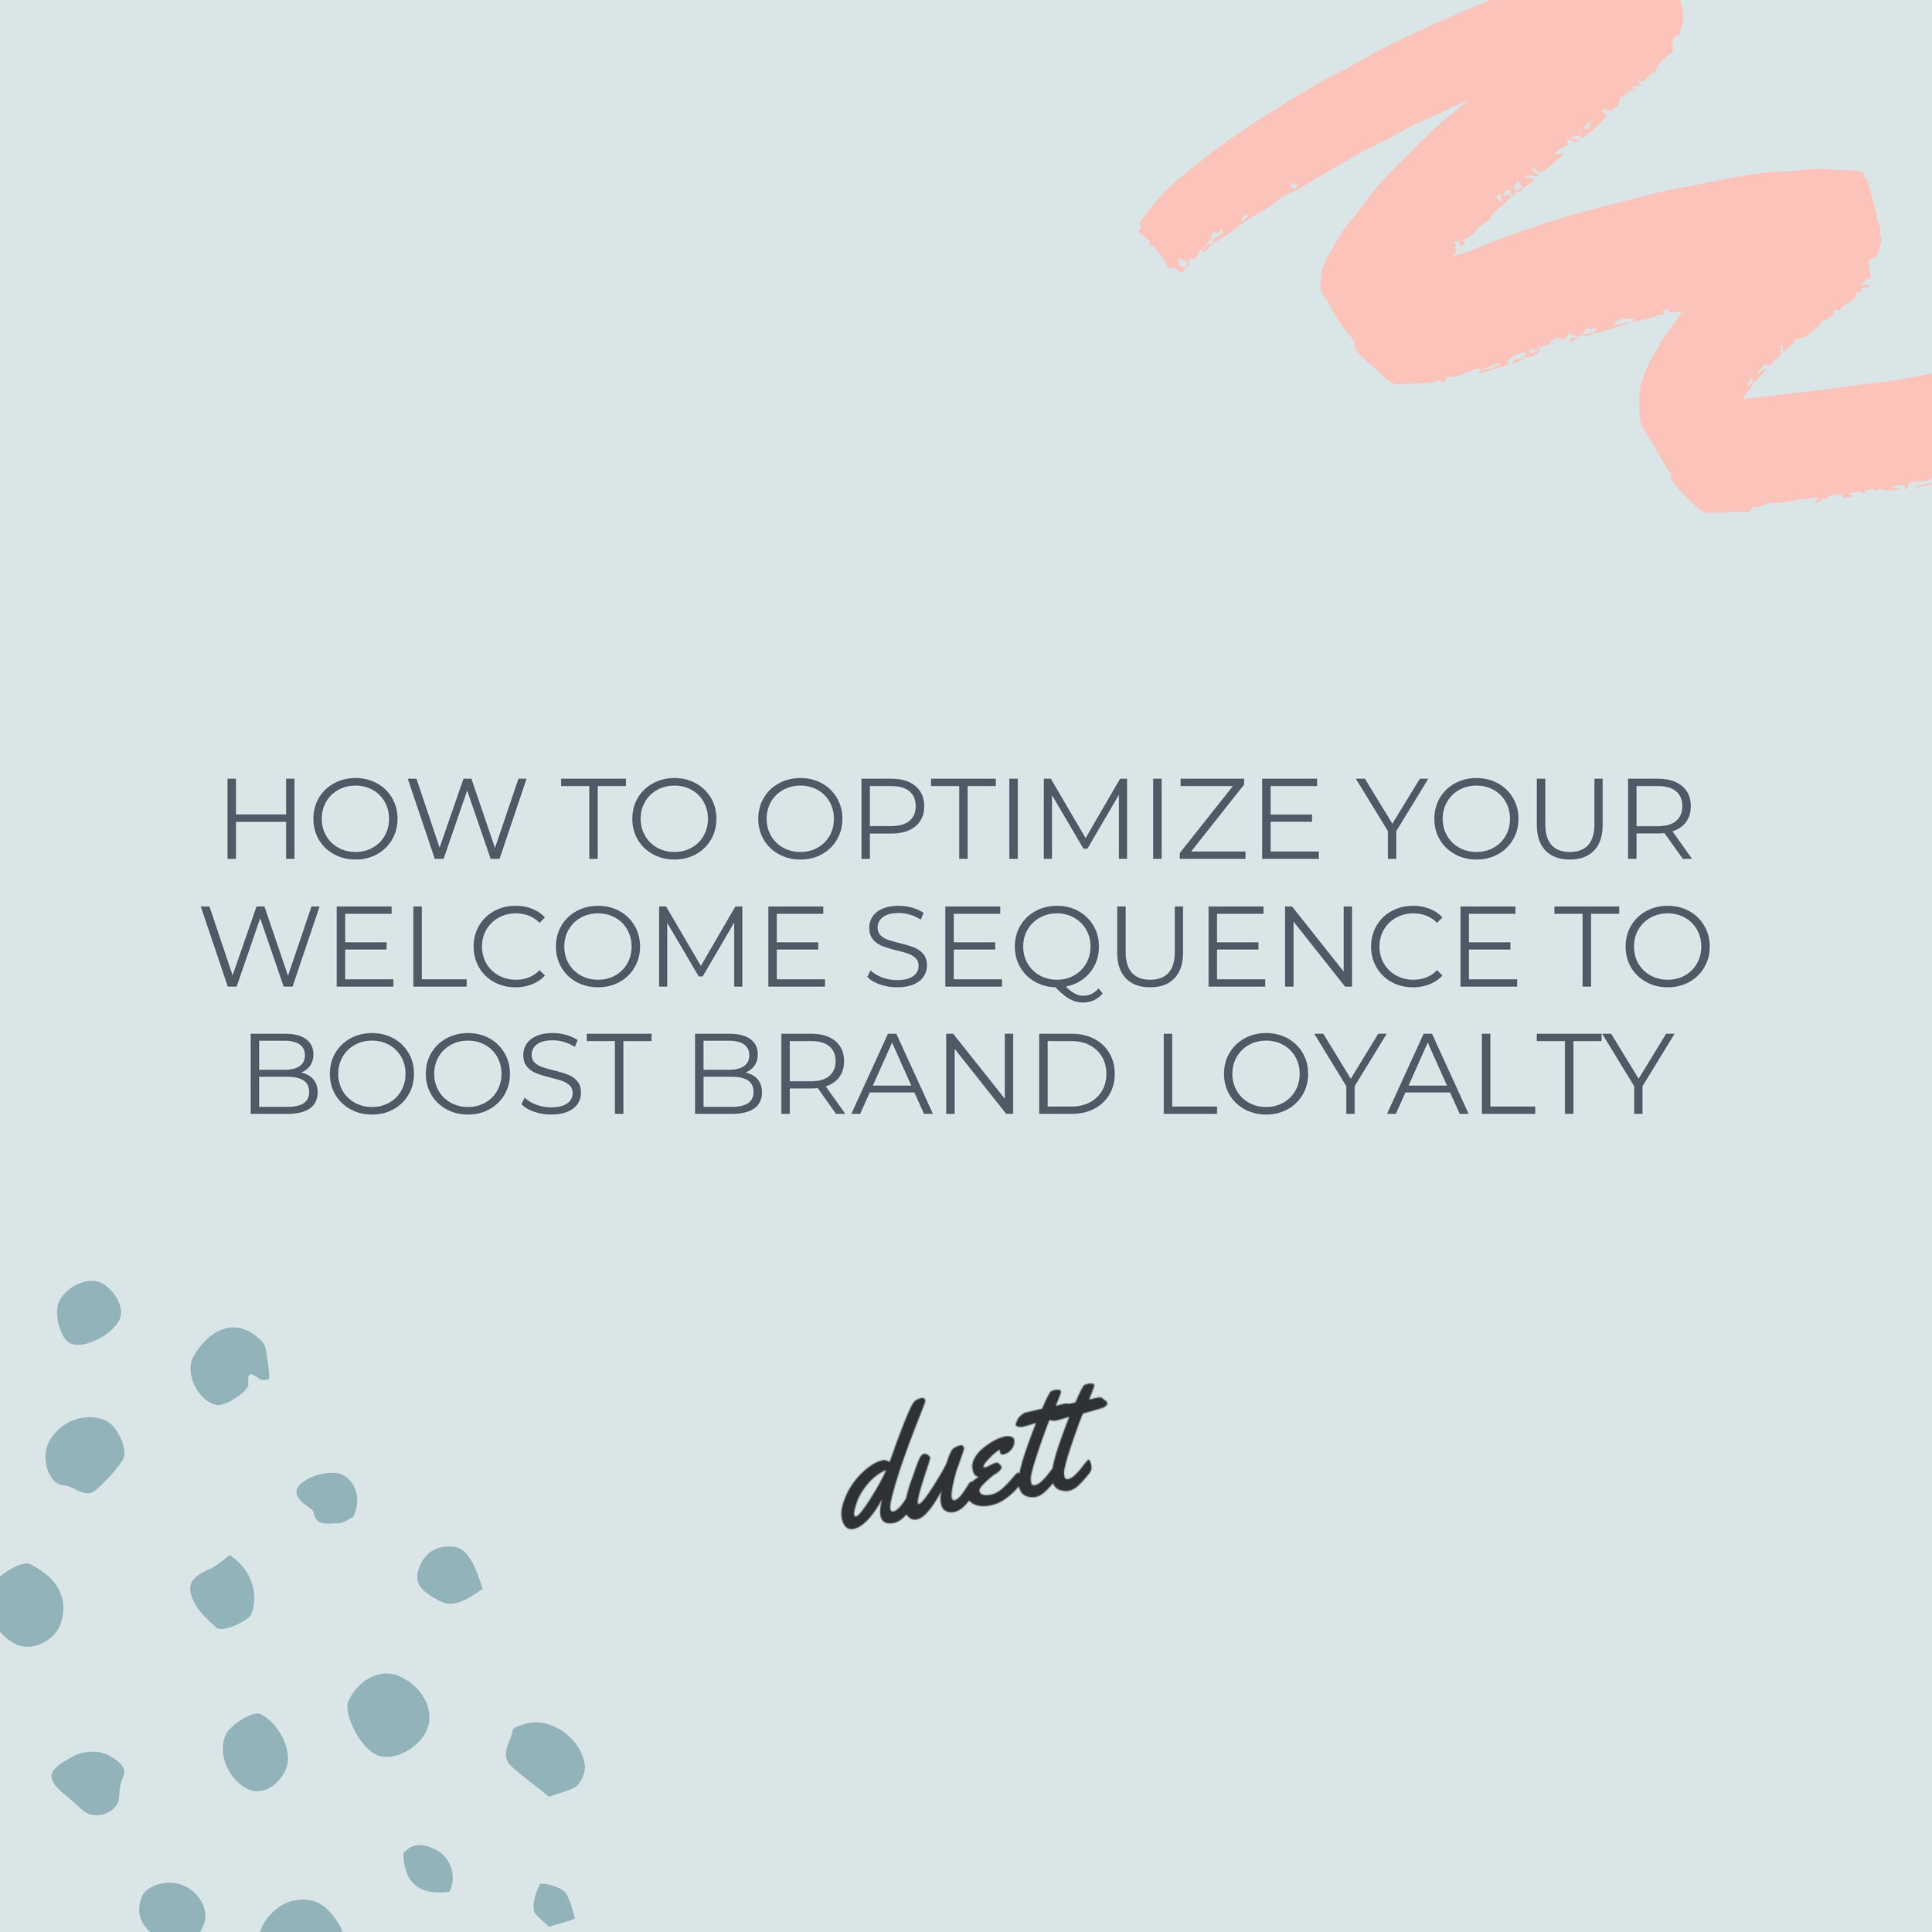 How to Optimize Your Welcome Sequence to Boost Brand Loyalty